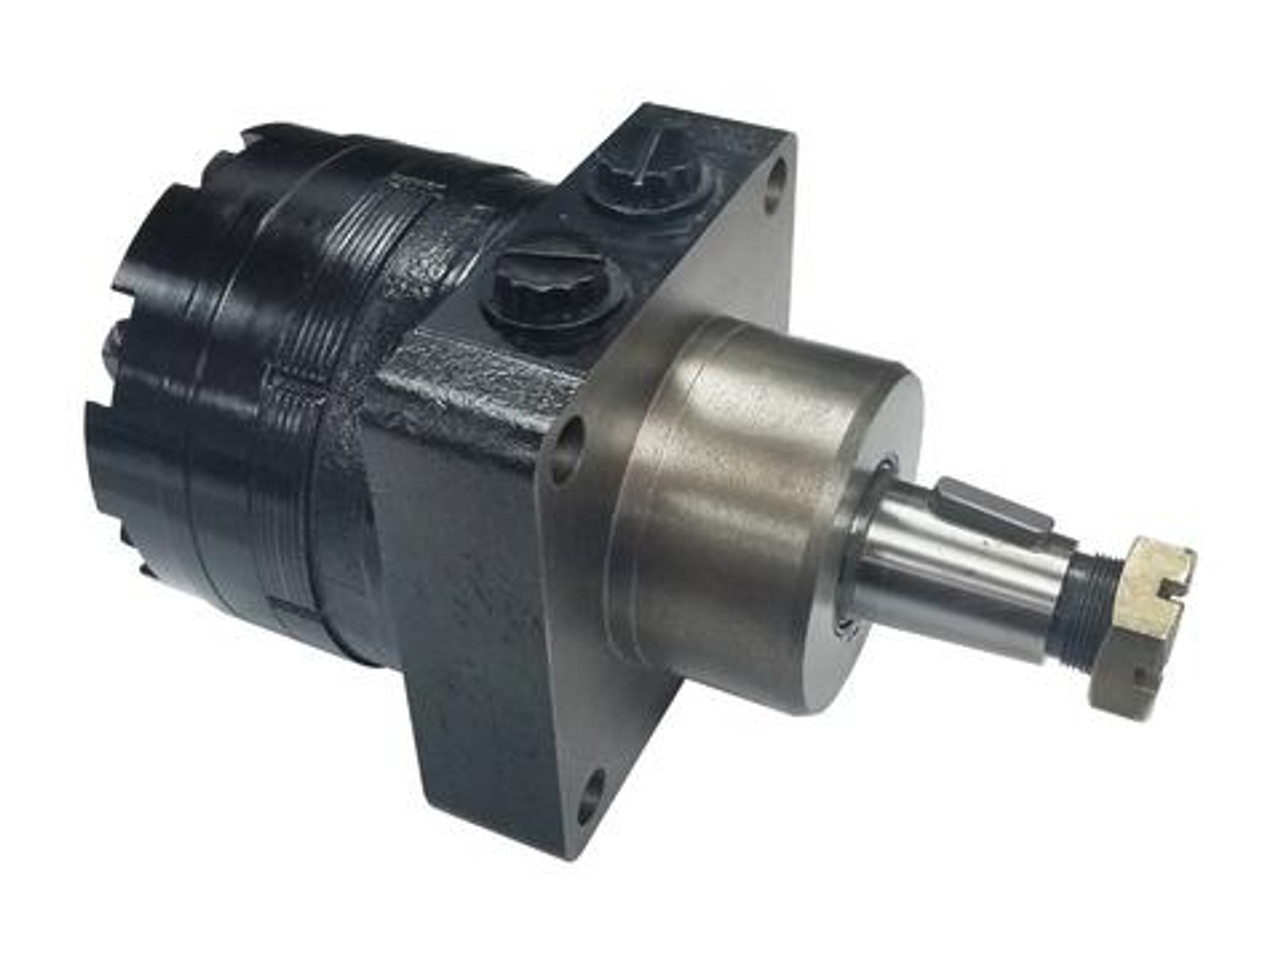 BMER-2-300-WS-G2-S-R Hydraulic motor low speed high torque 18.08 cubic inch displacement  Dynamic Fluid Components